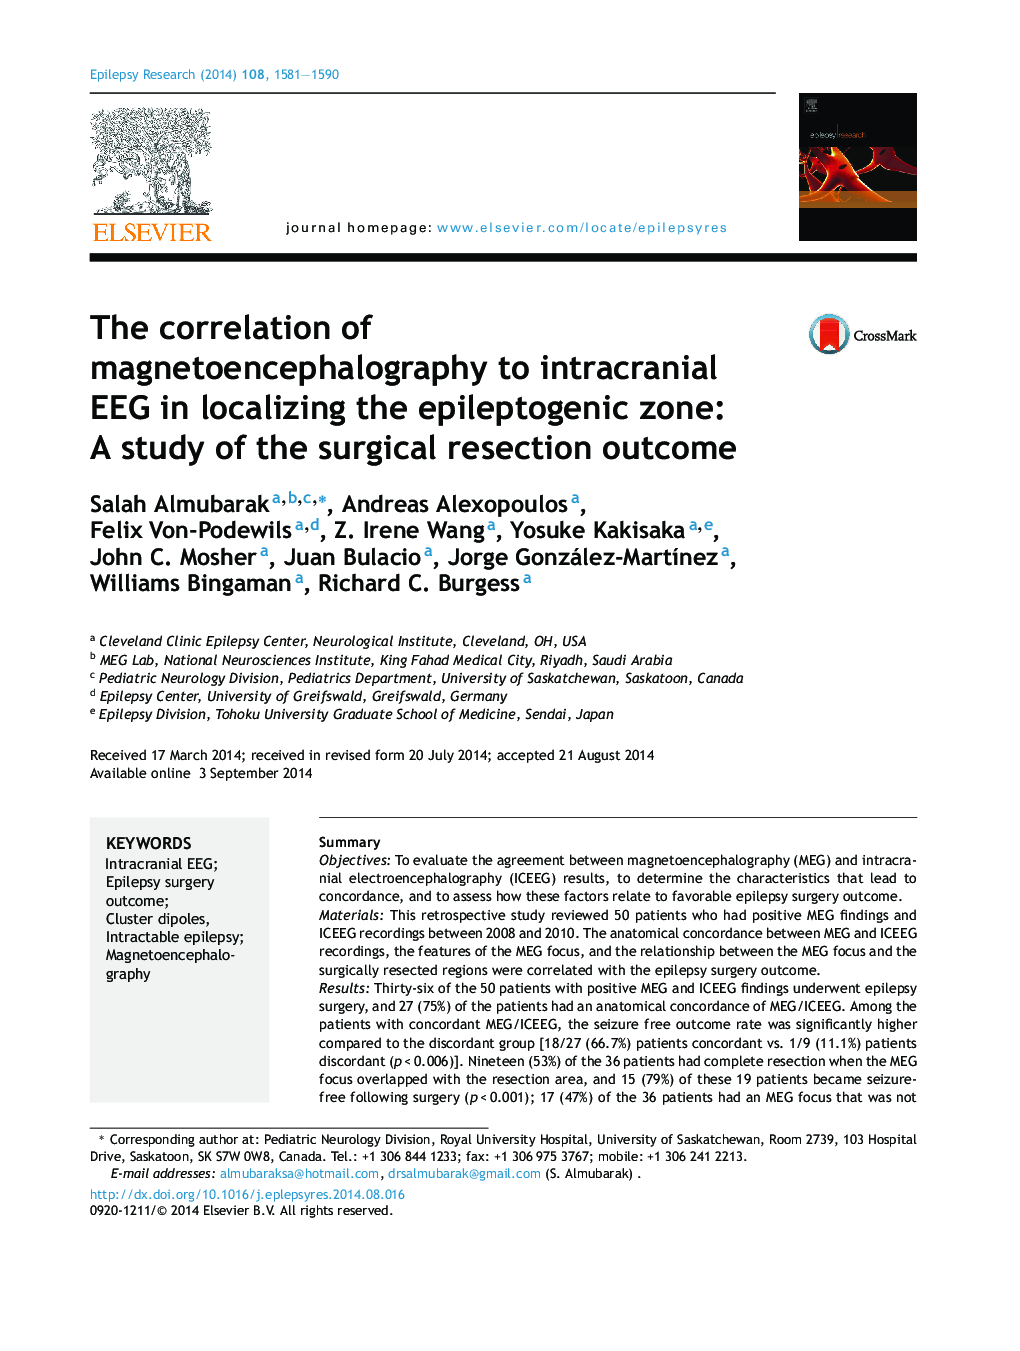 The correlation of magnetoencephalography to intracranial EEG in localizing the epileptogenic zone: A study of the surgical resection outcome